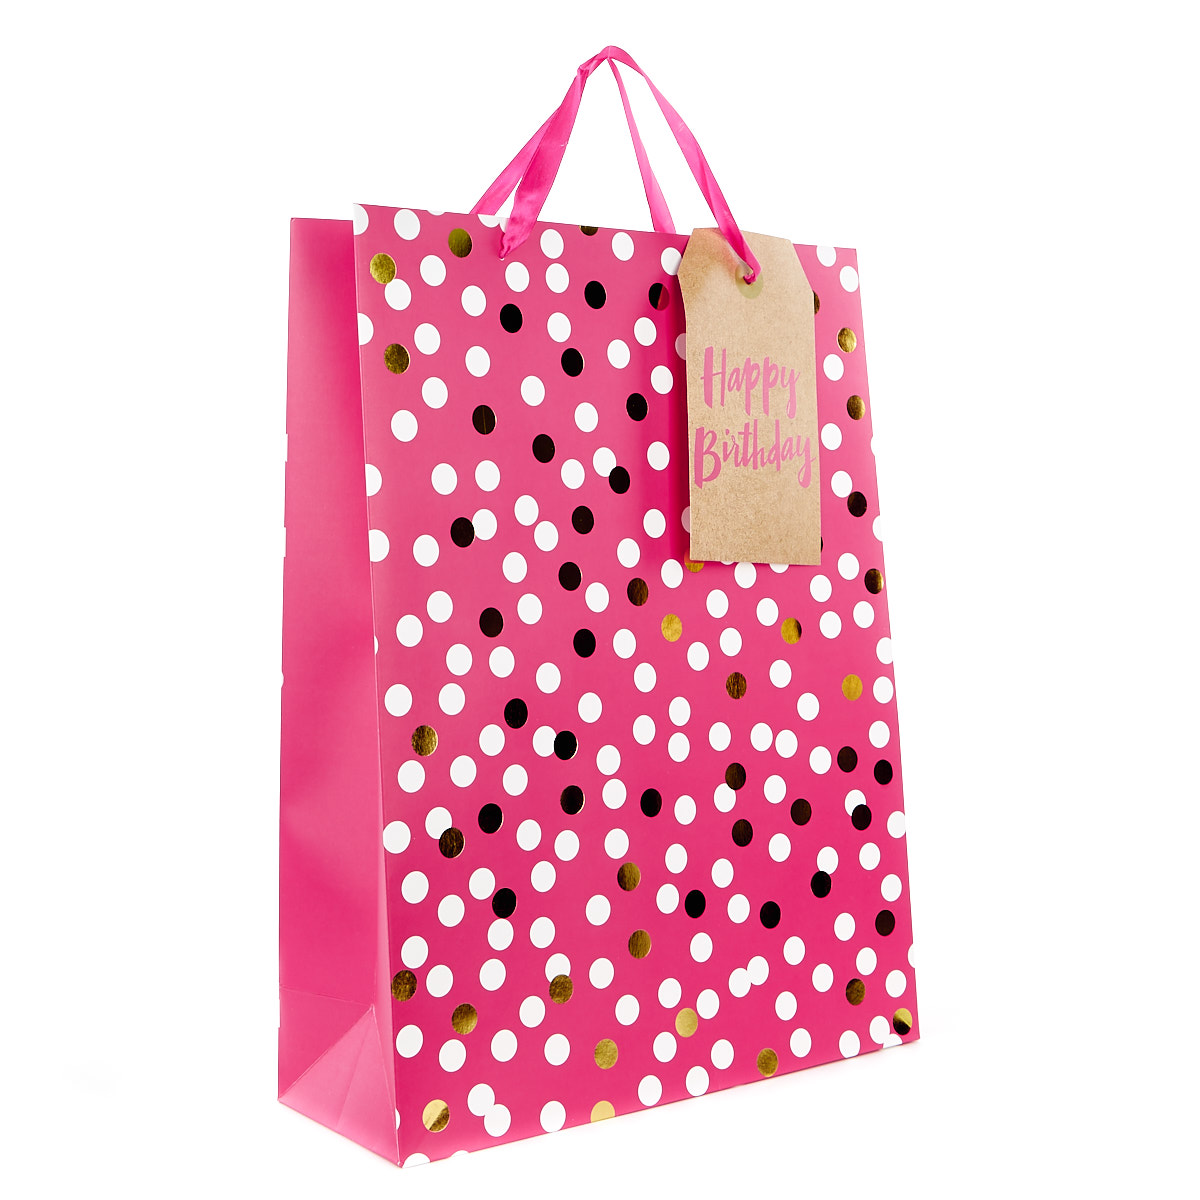 Extra Large Portrait Gift Bag - Pink Spots, Happy Birthday